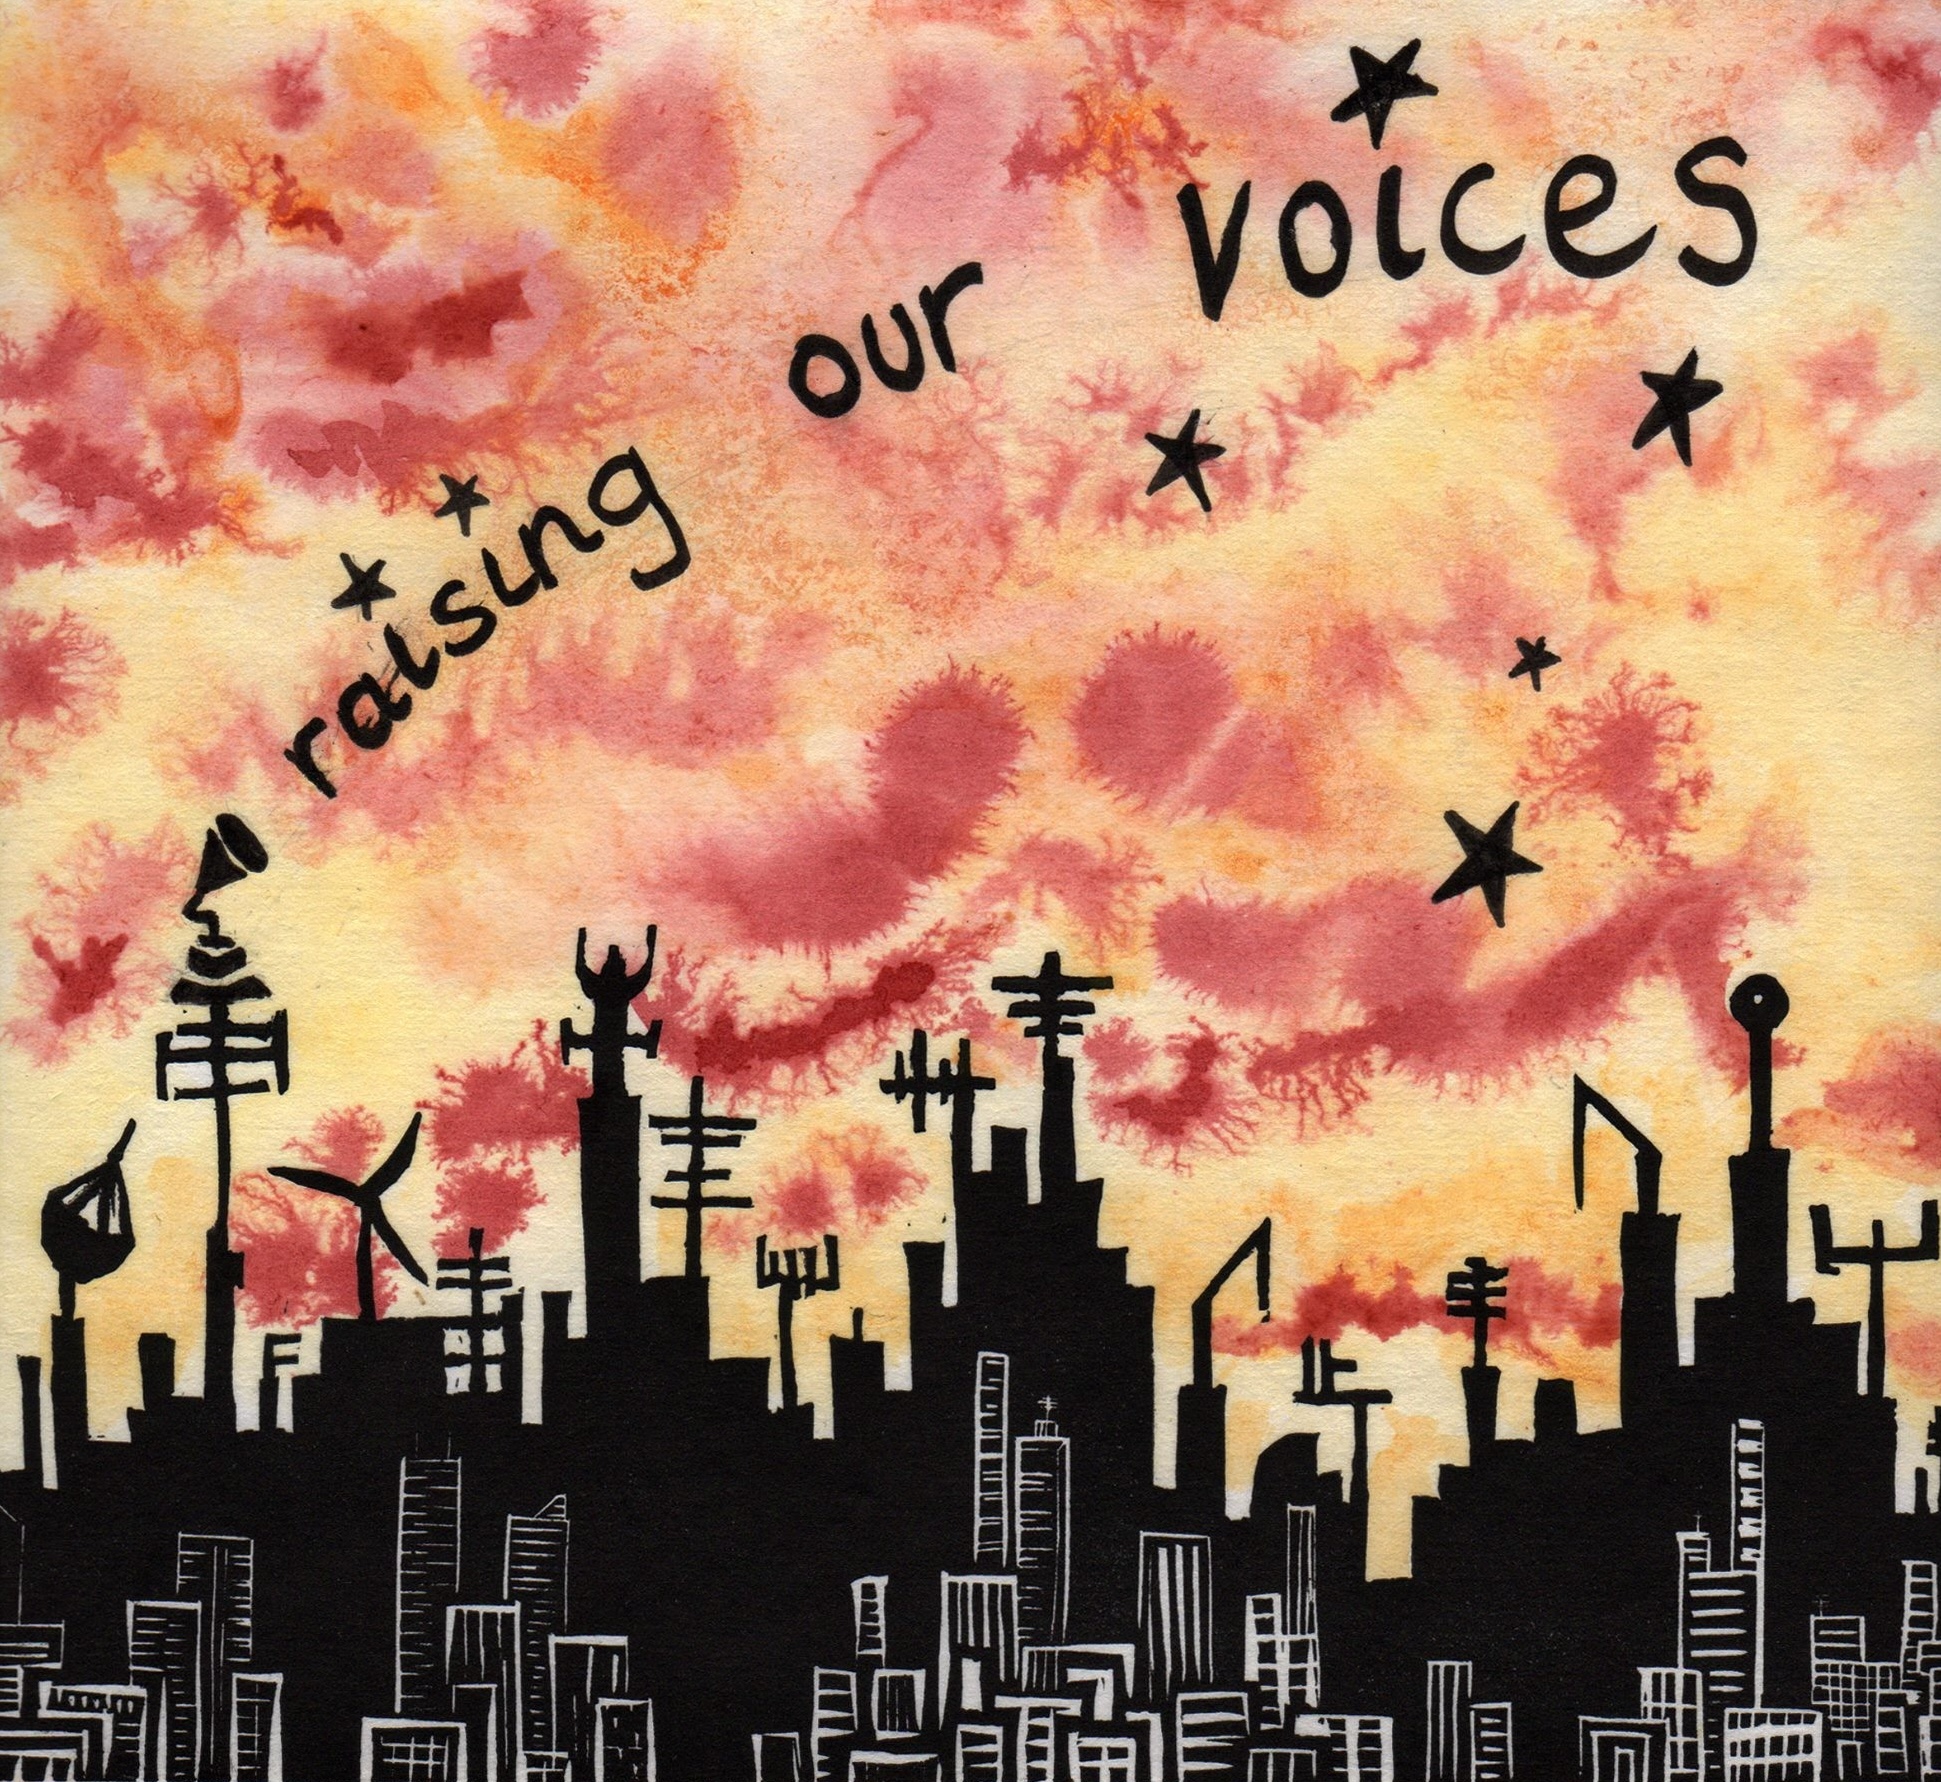 A brilliant pink sky illuminates a dark cityscape with Raising Our Voices written across the sky by artist Larissa McFarlane for the 25year anniversary CD 